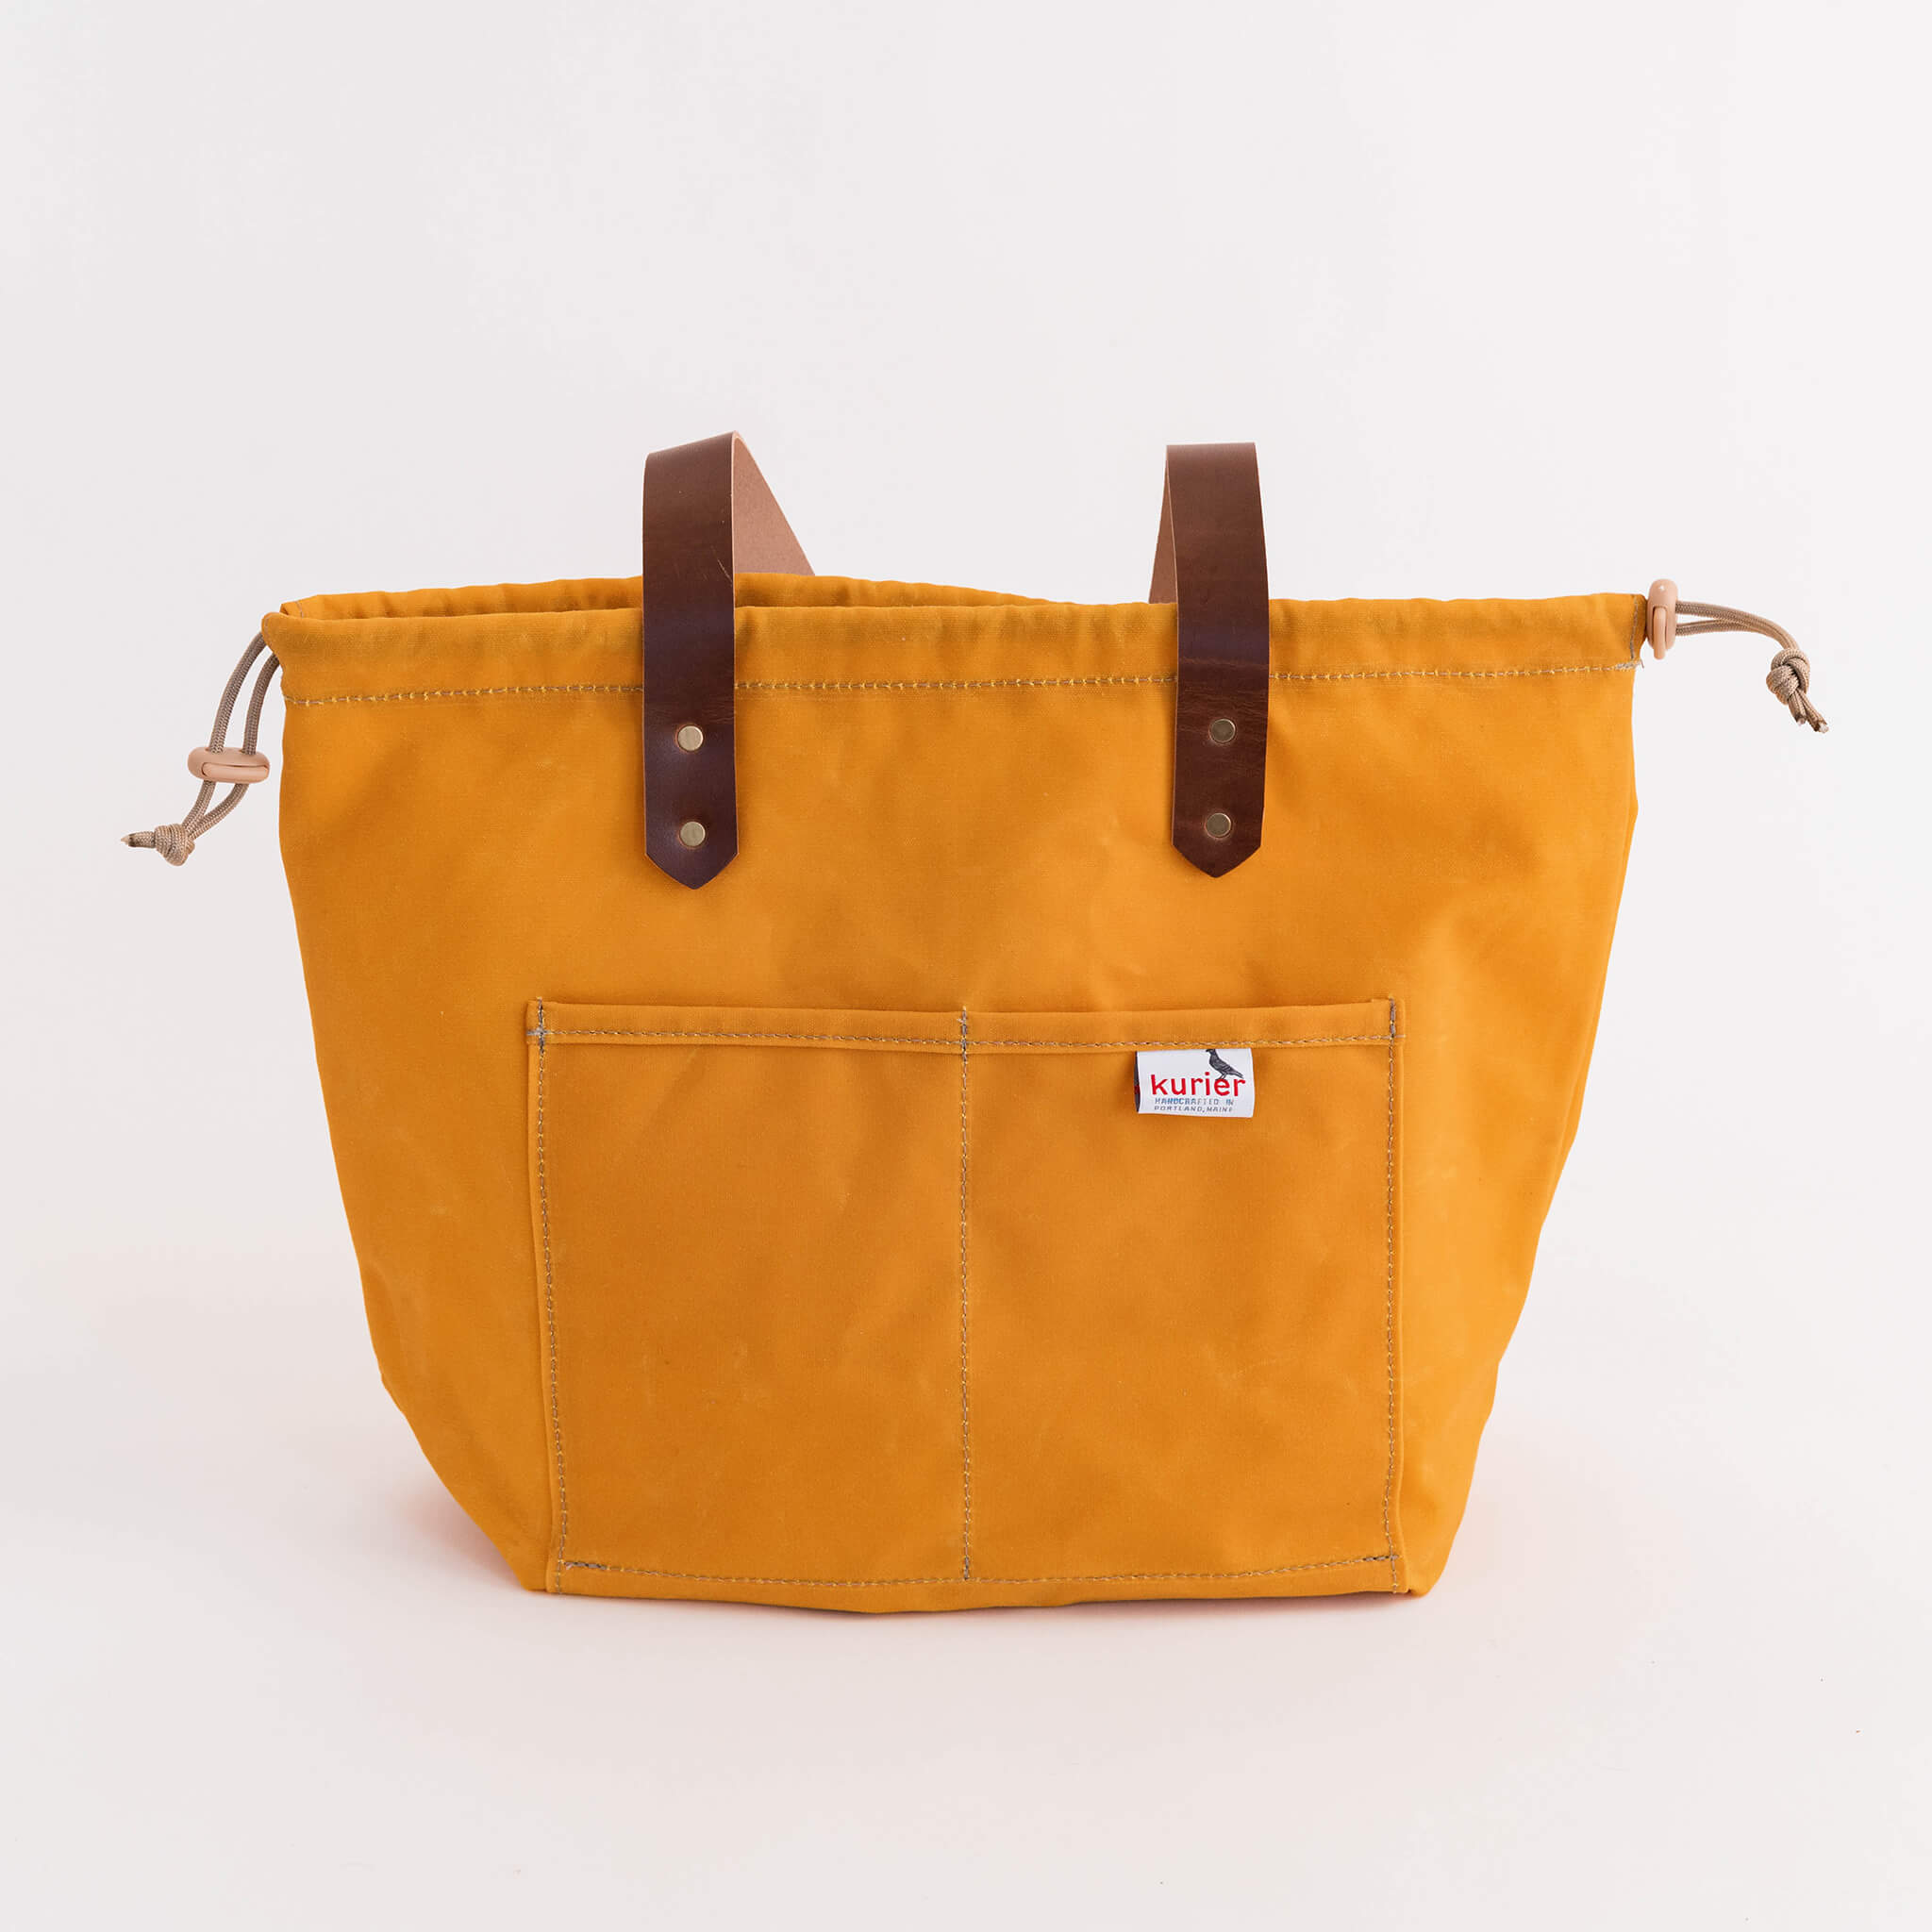 waxed canvas town tote - drawstring travel bag - handmade leather - buttercup open view